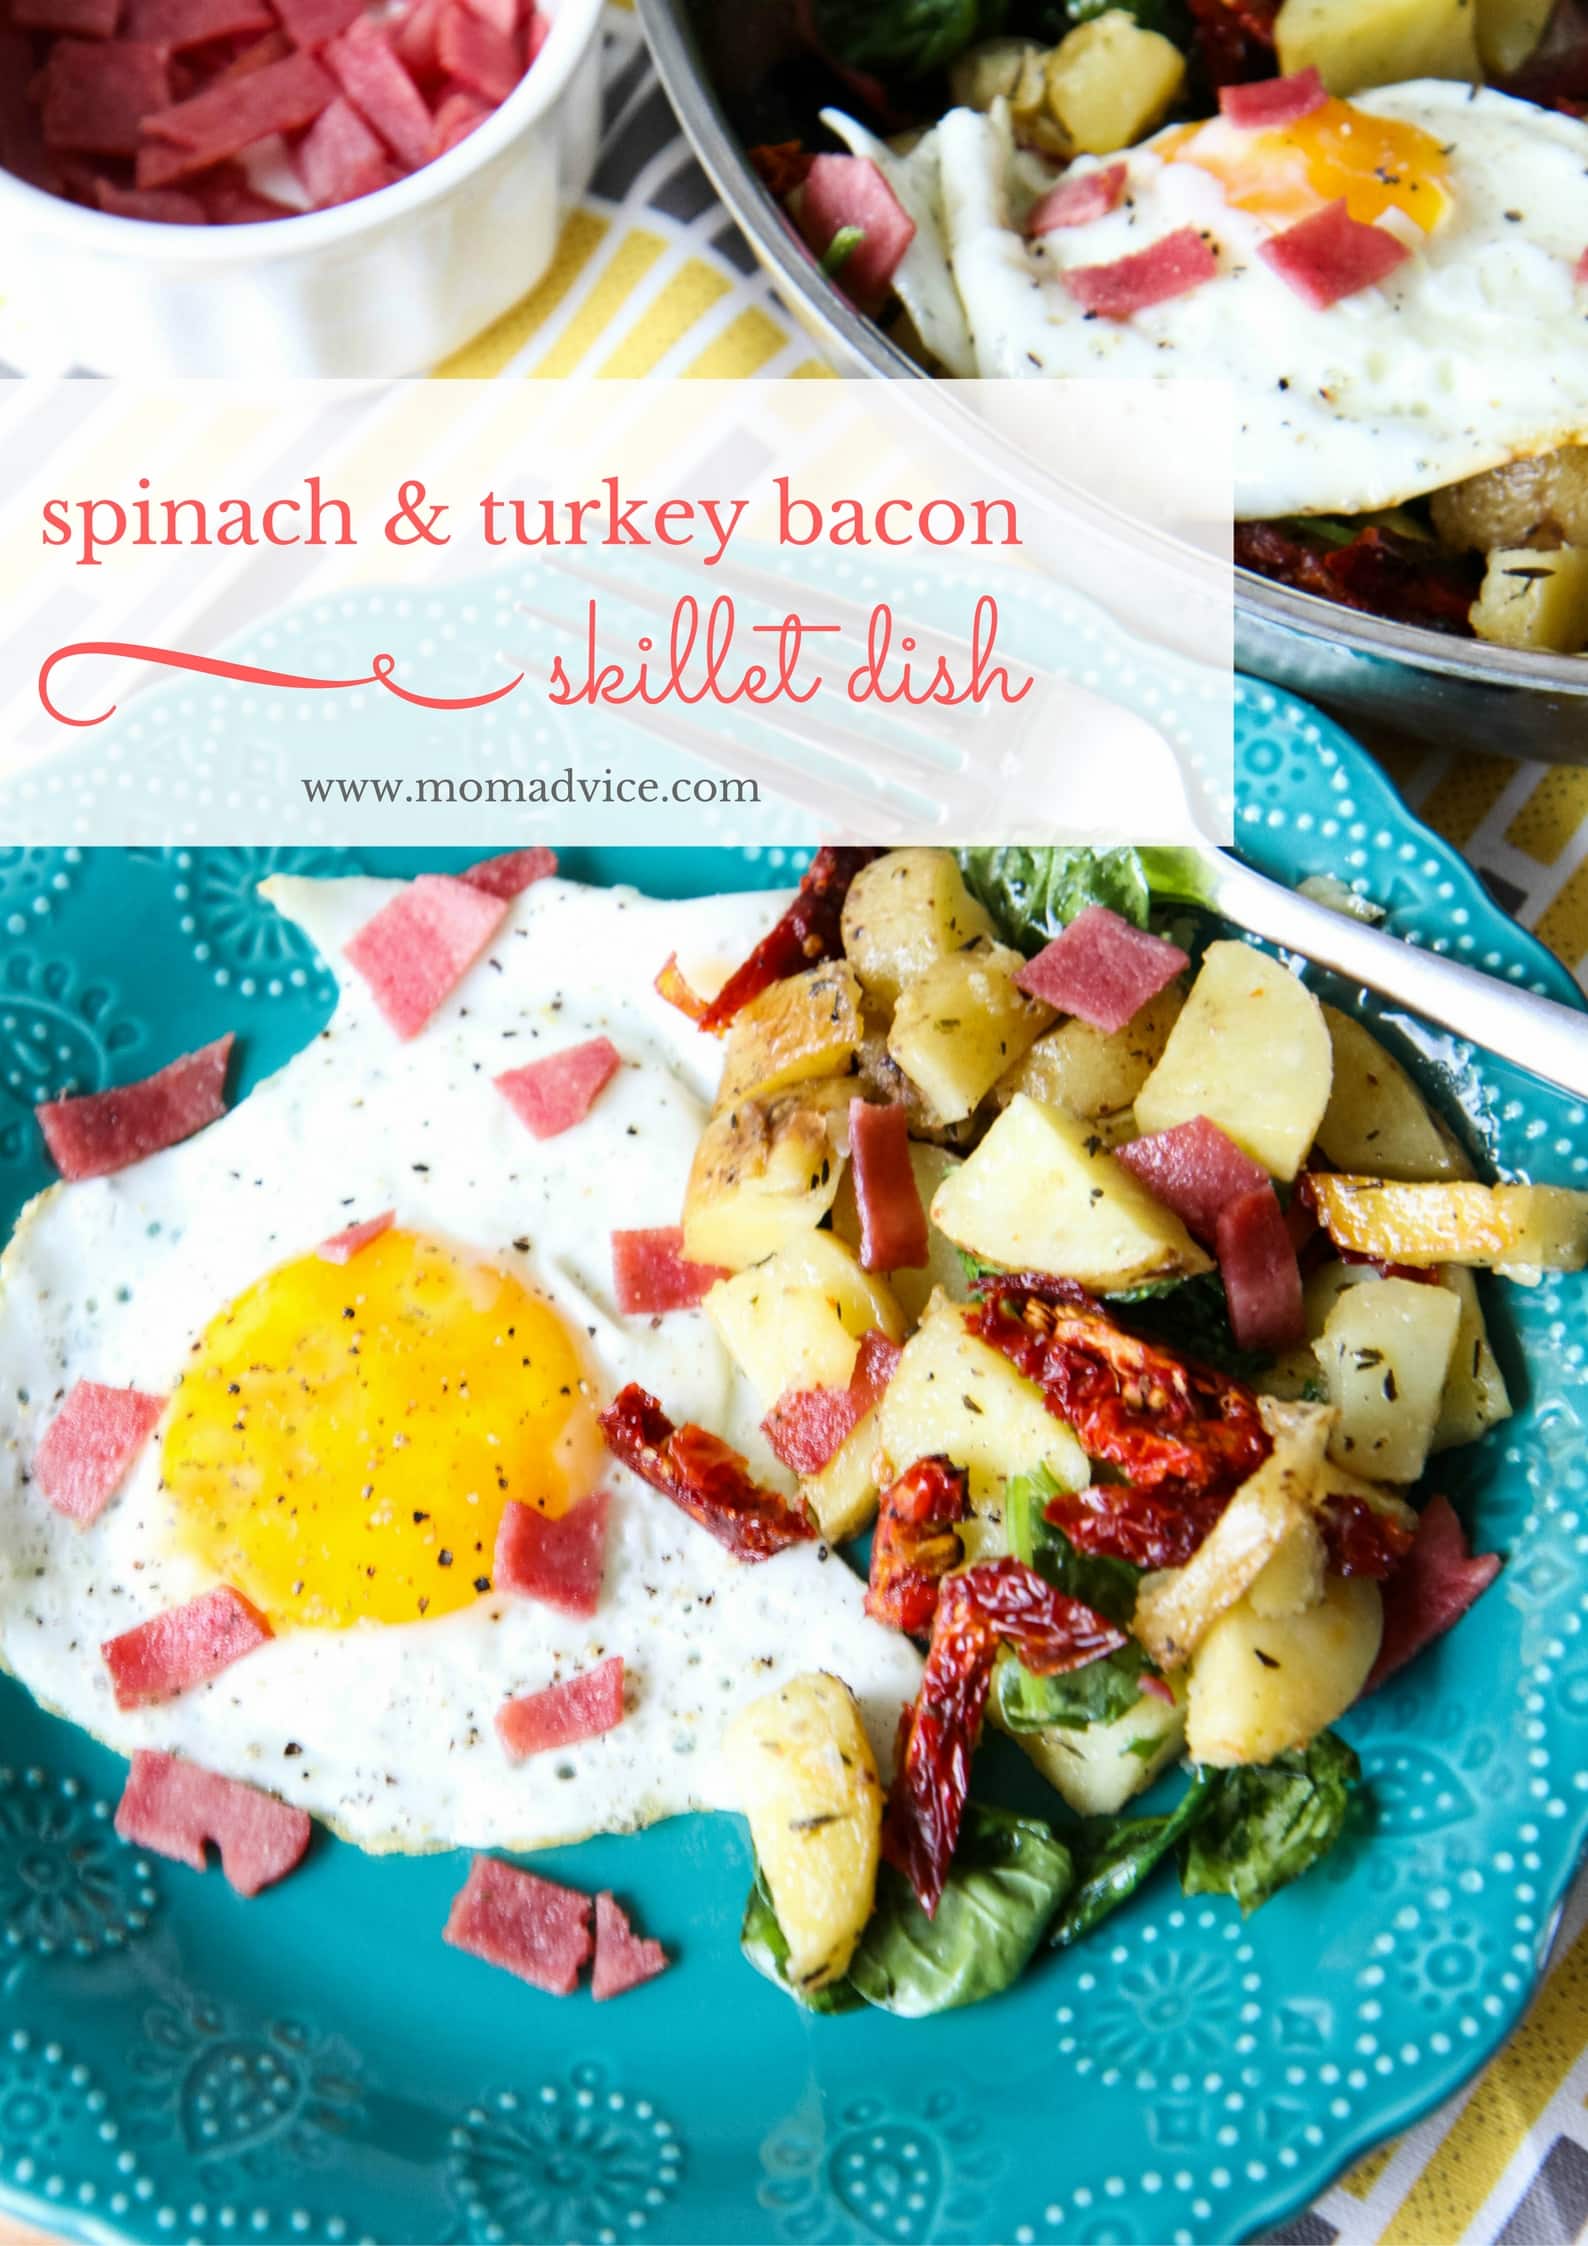 Spinach and Turkey Bacon Skillet Dish from MomAdvice.com